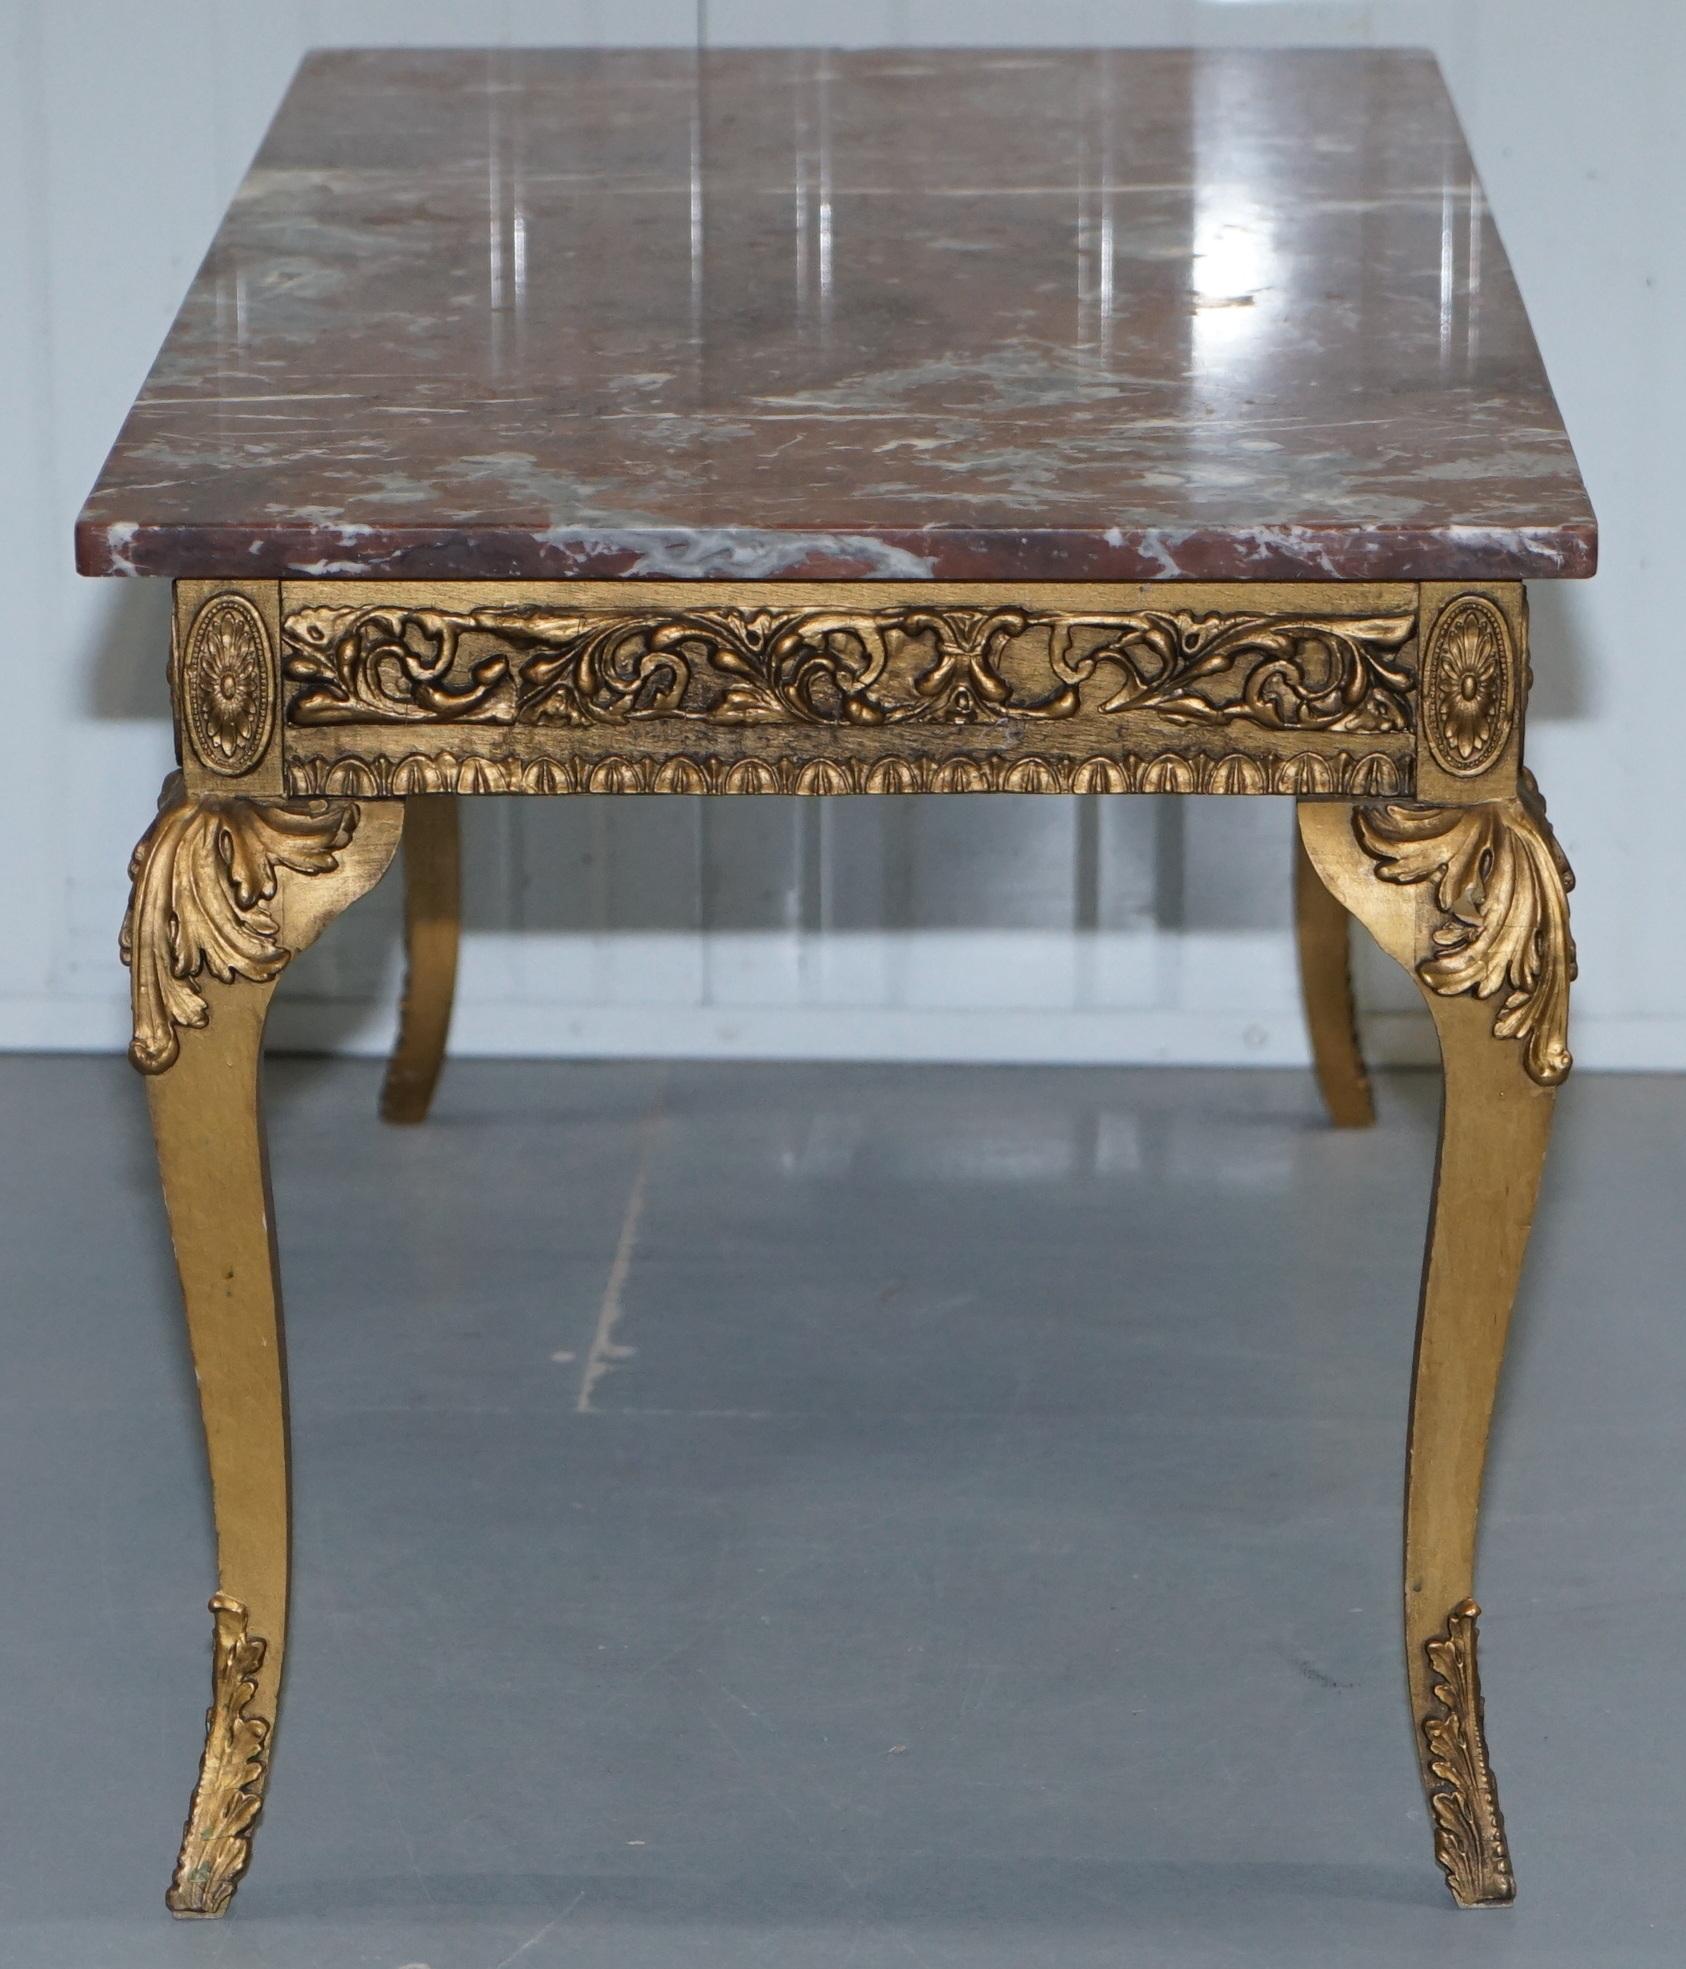 Rouge Marble Topped French Giltwood Coffee Table Heavy Rococo Baroque Carving 13